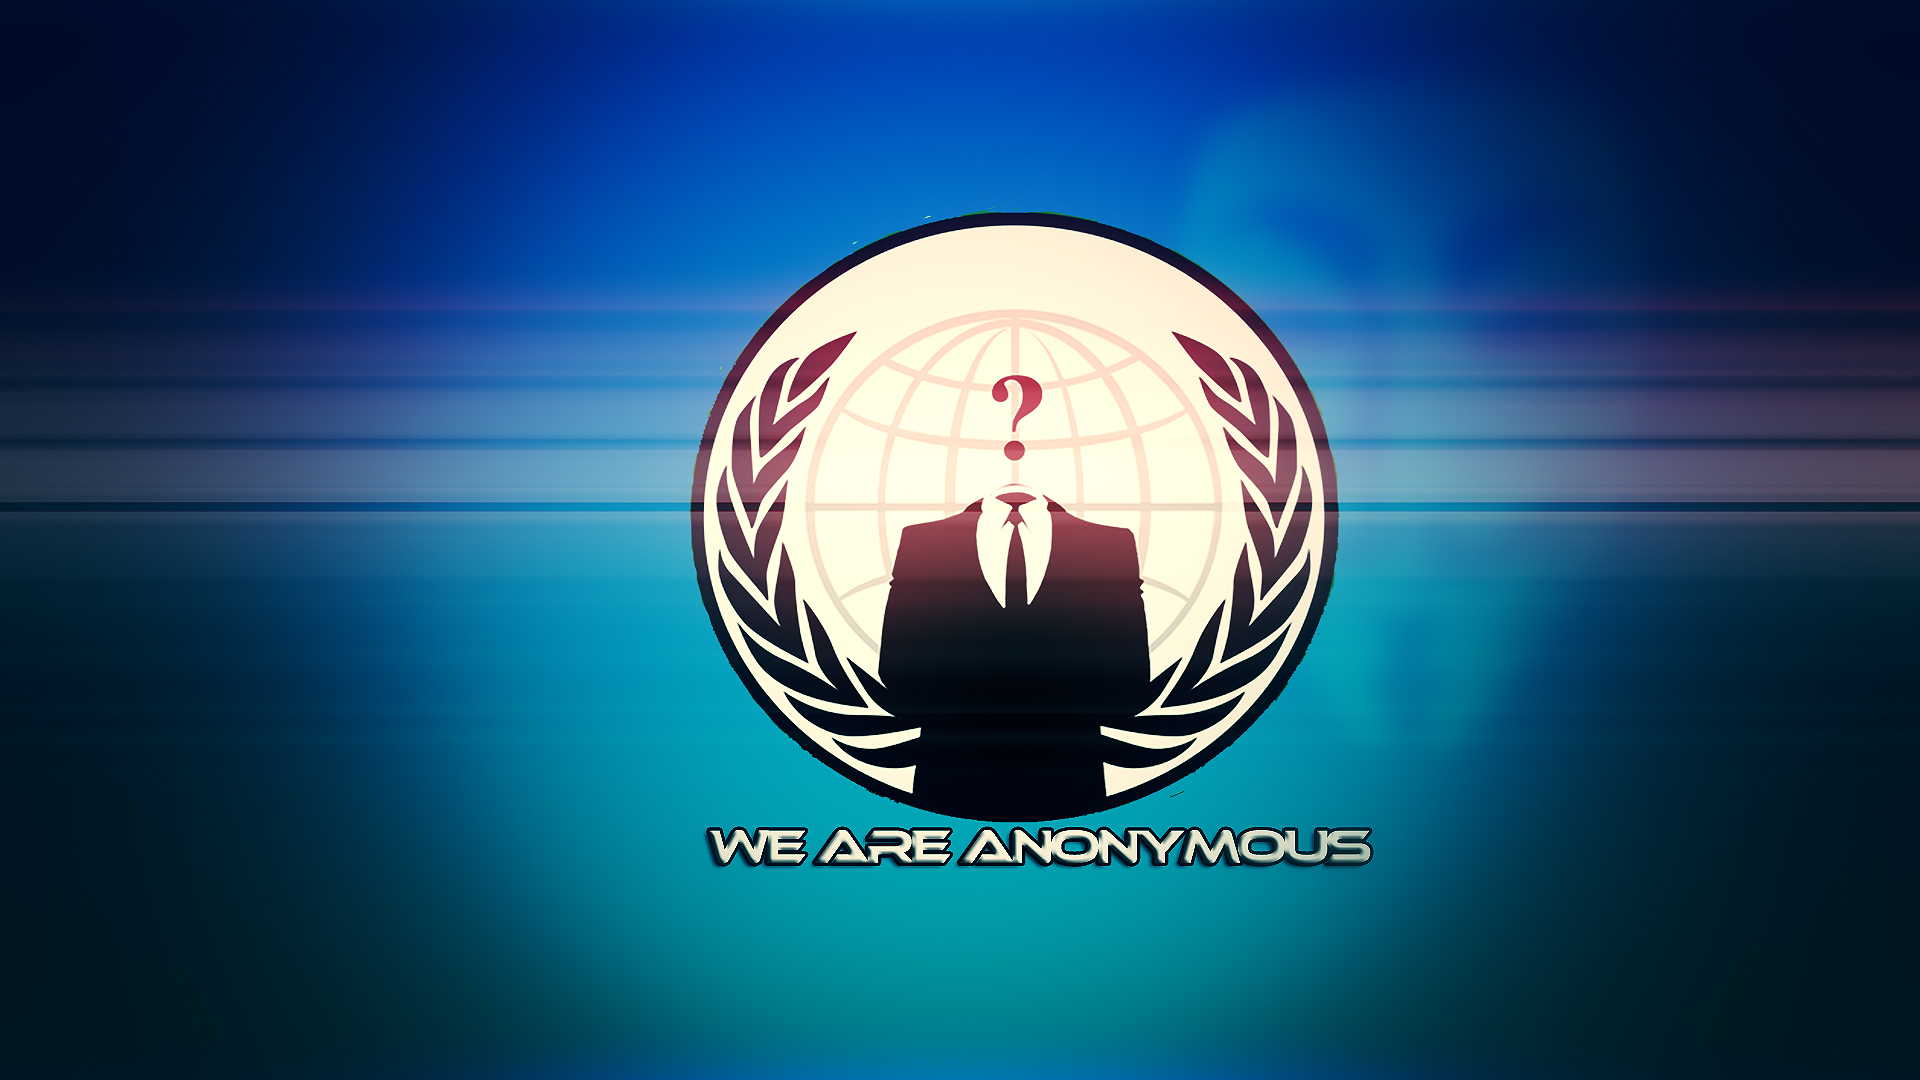 Wallpaper, Anonymous, hacking 1920x1080